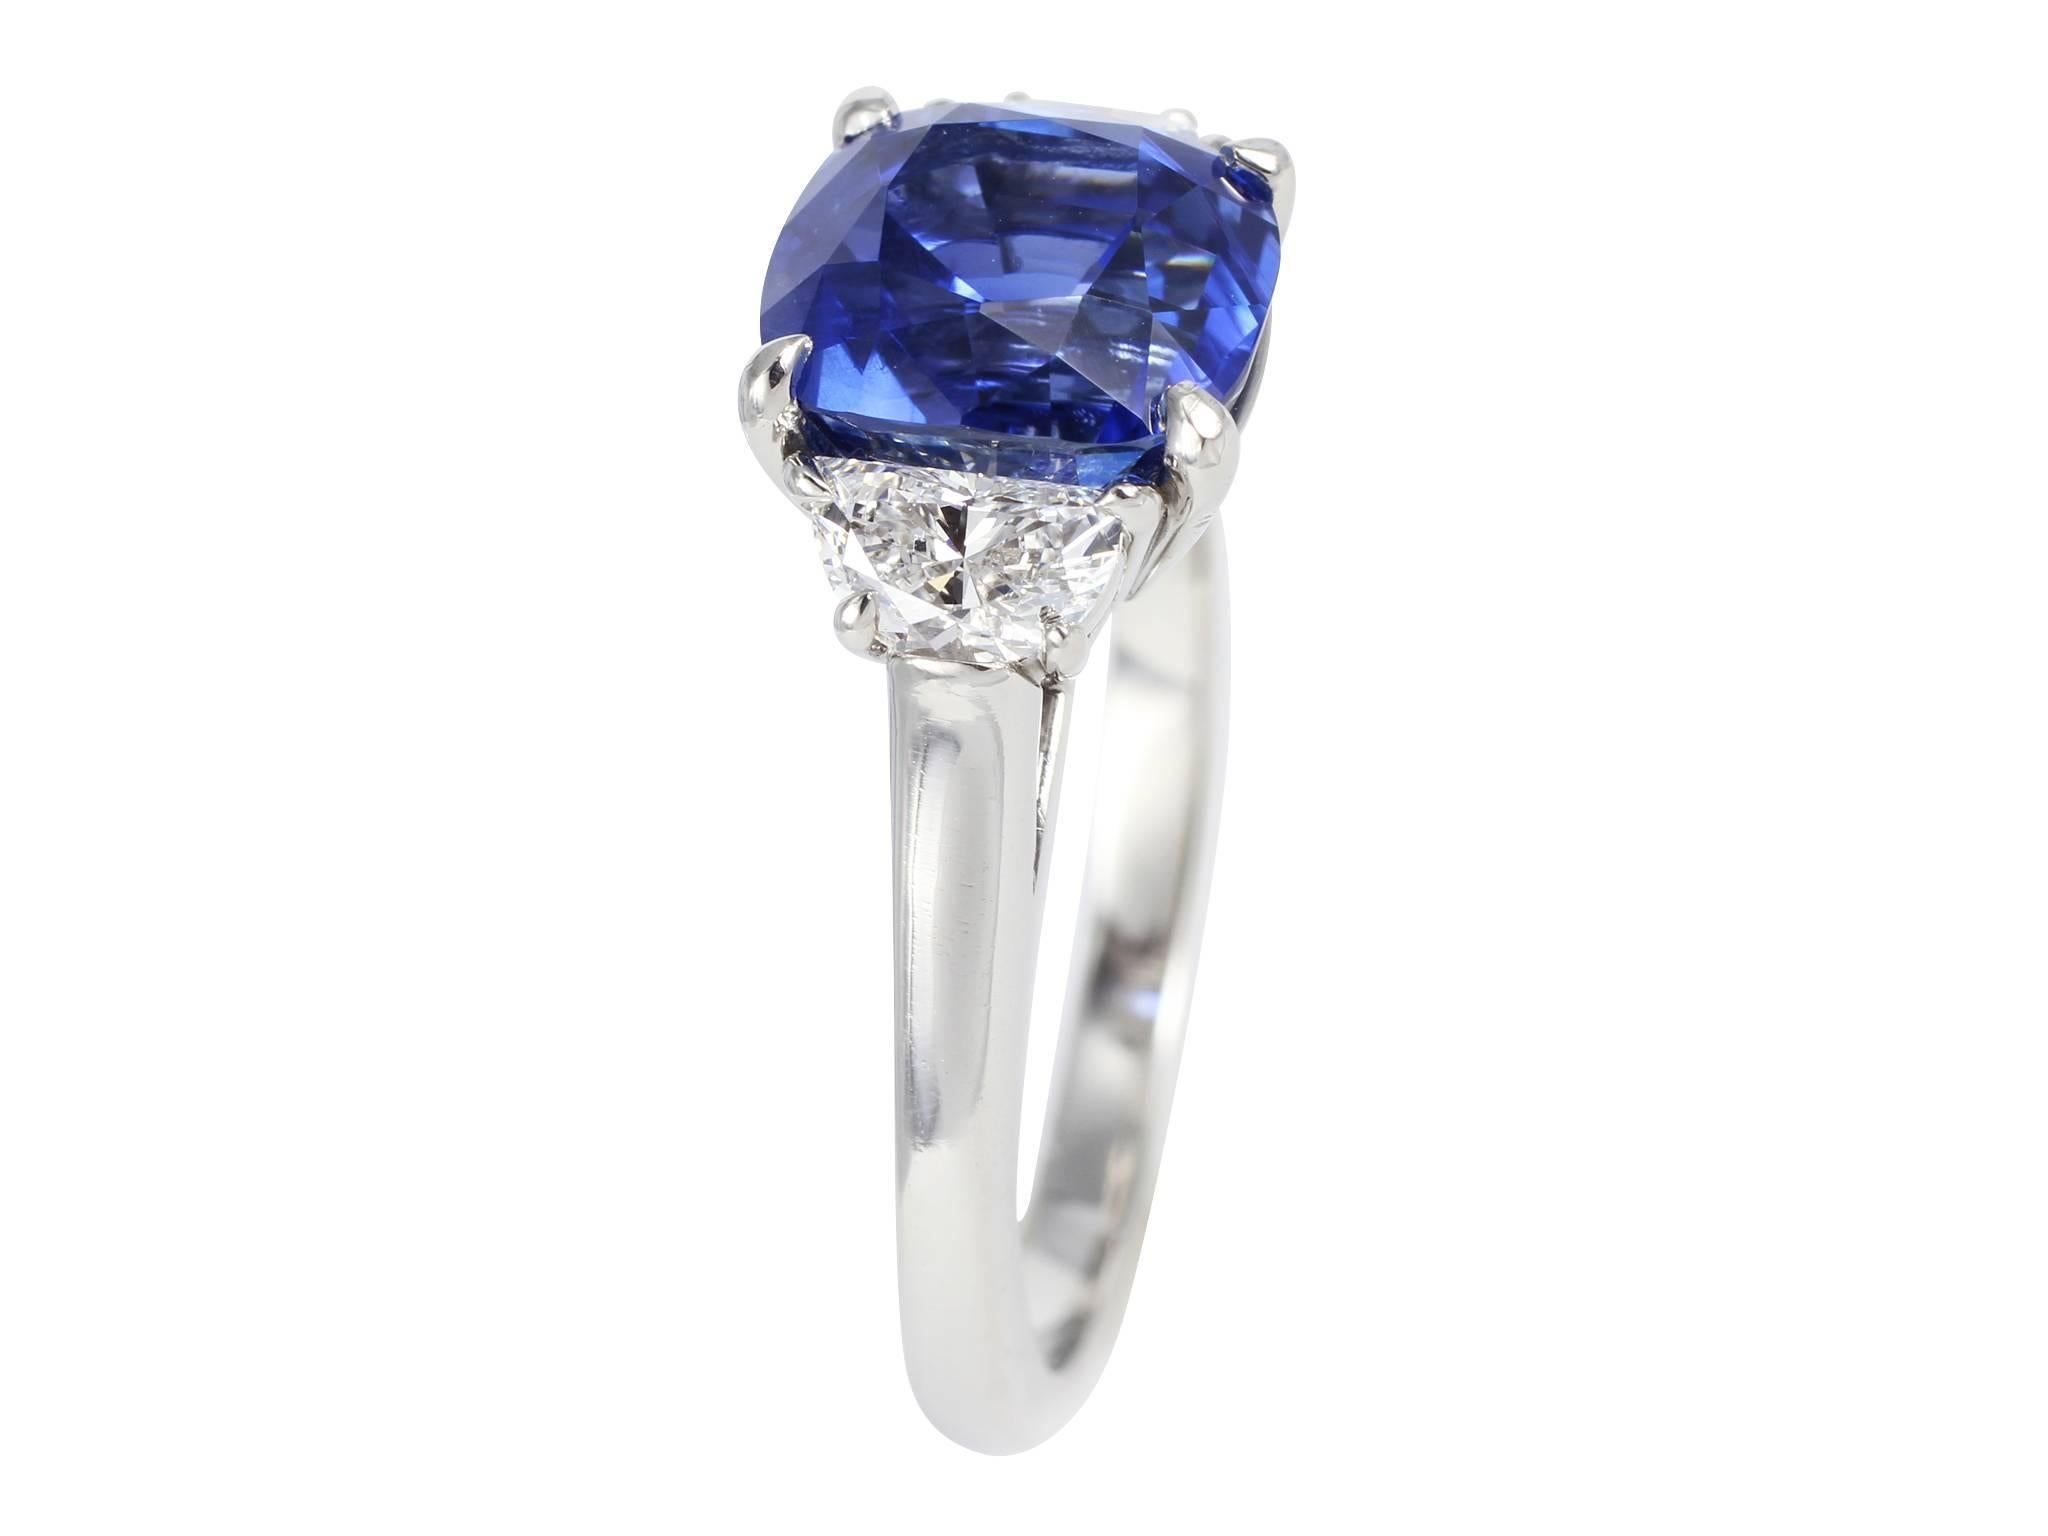 Platinum custom made Cushion cut Ceylon Sapphire weighing 4.13 carats flanked by a pair of trapezoid cut diamonds weighing 0.86 carats three stone ring